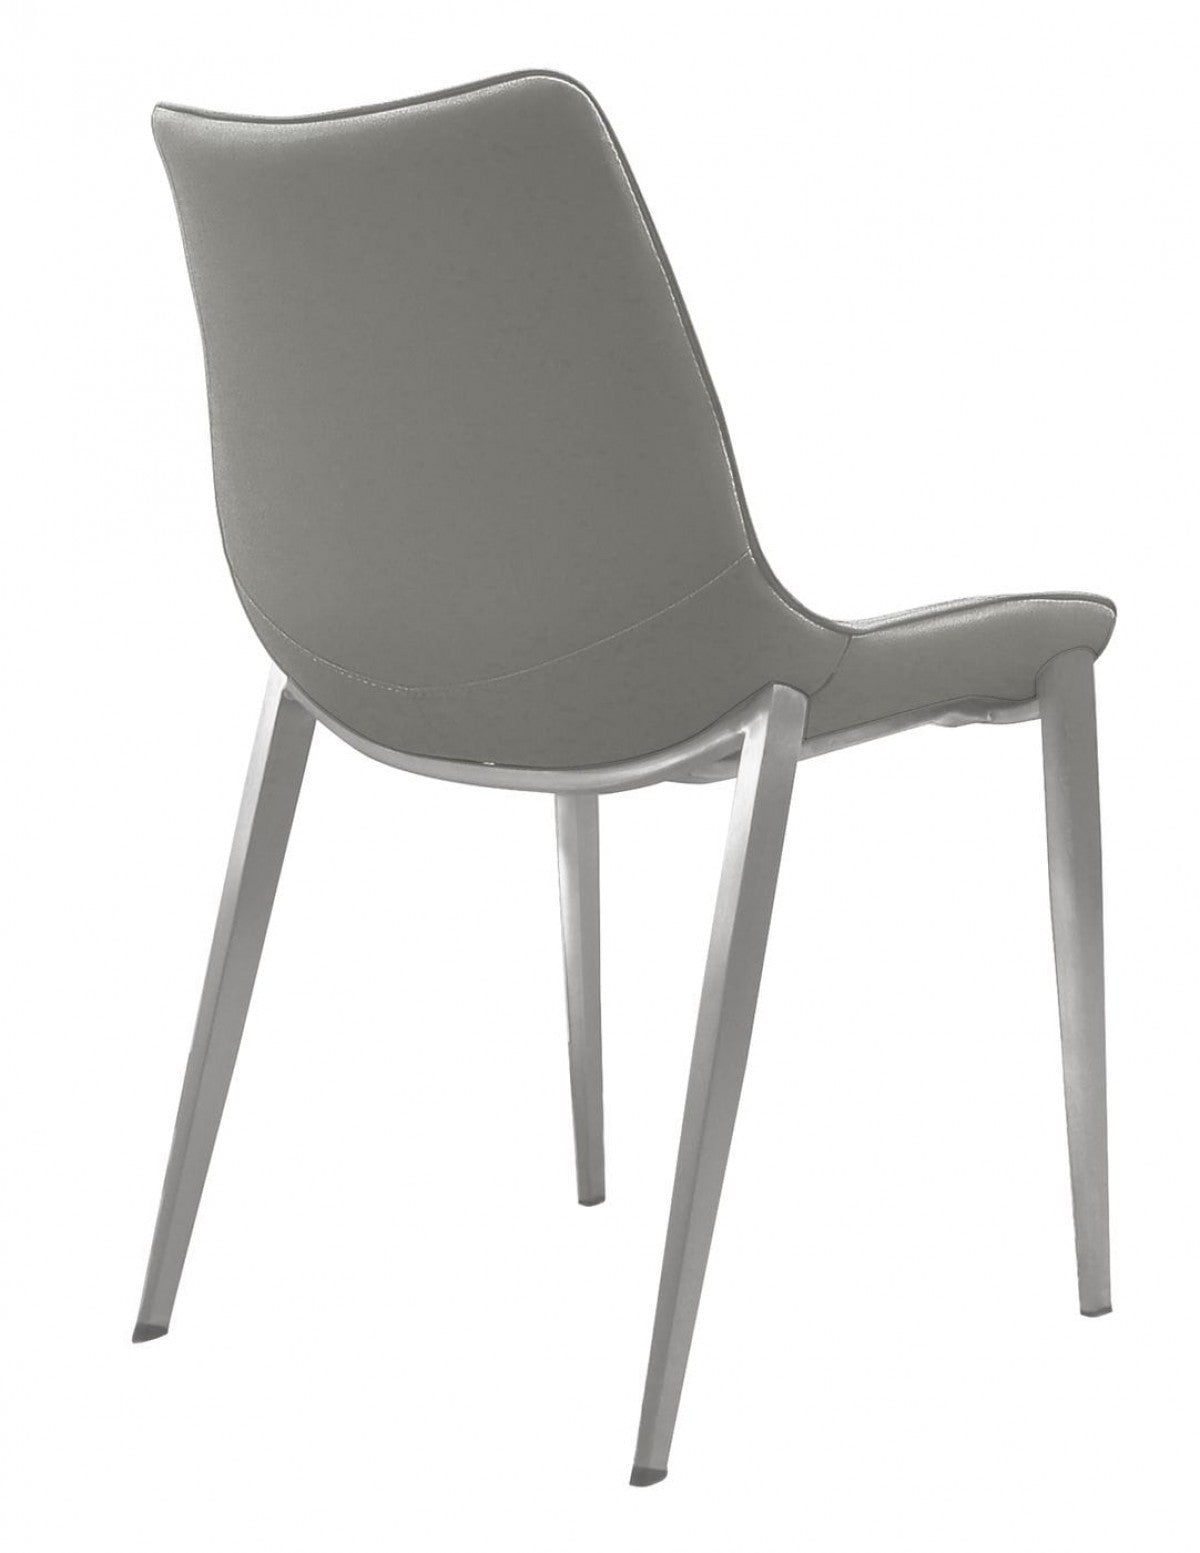 Set of Two Gray Faux Leather Modern Dining Chairs